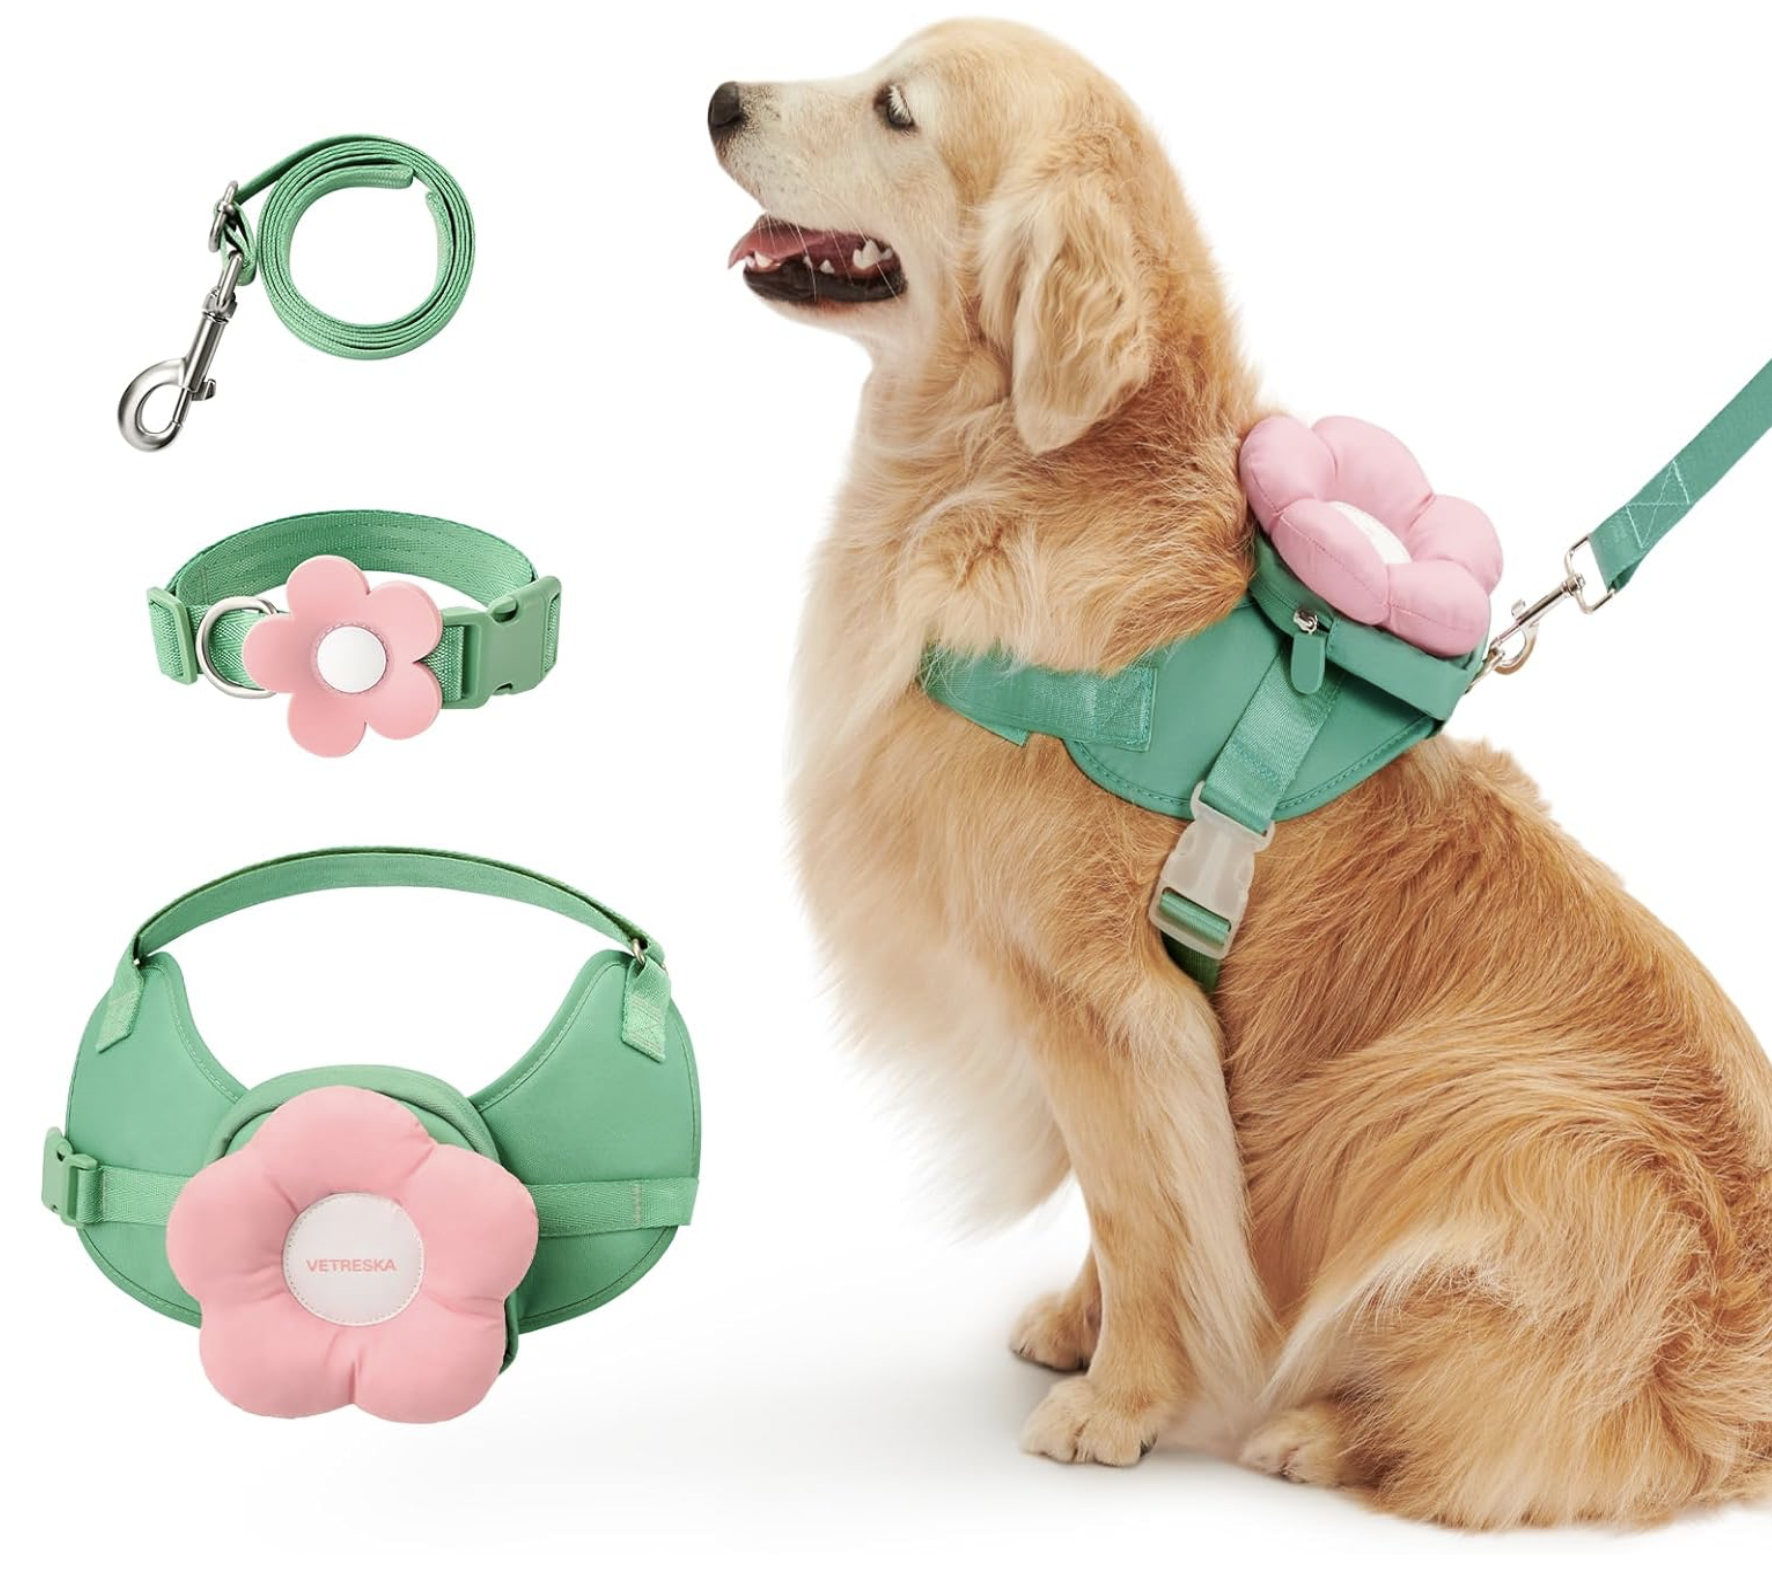 flower backpack harness for large dog with poop bag holder pouch and leash 